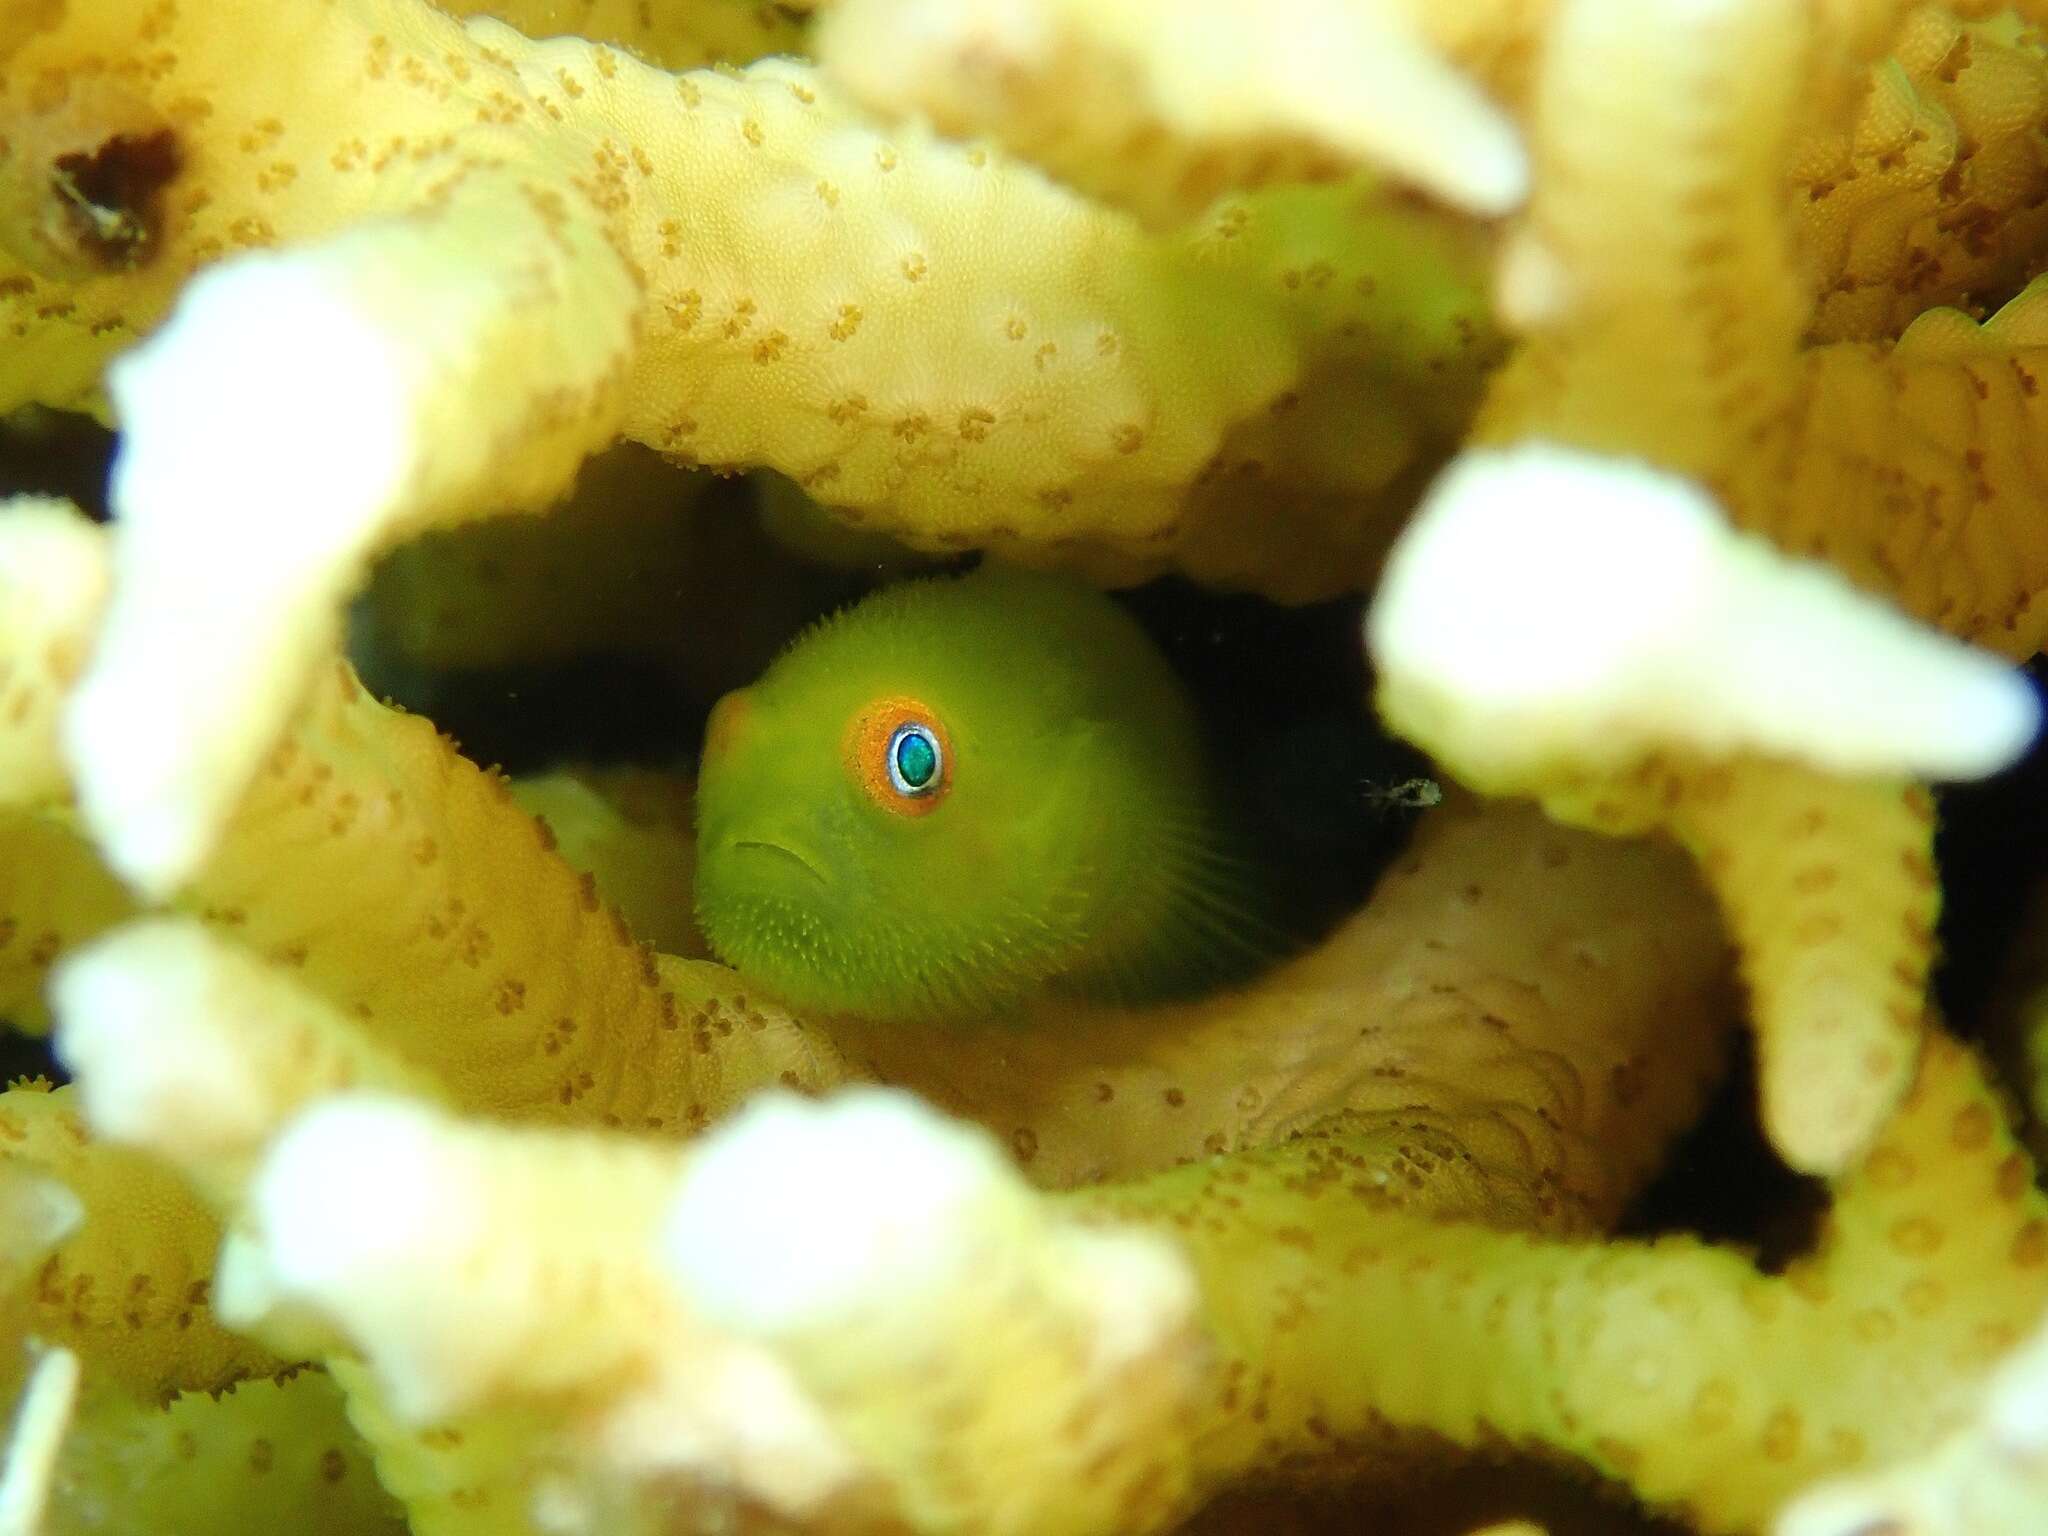 Image of Emerald coral goby